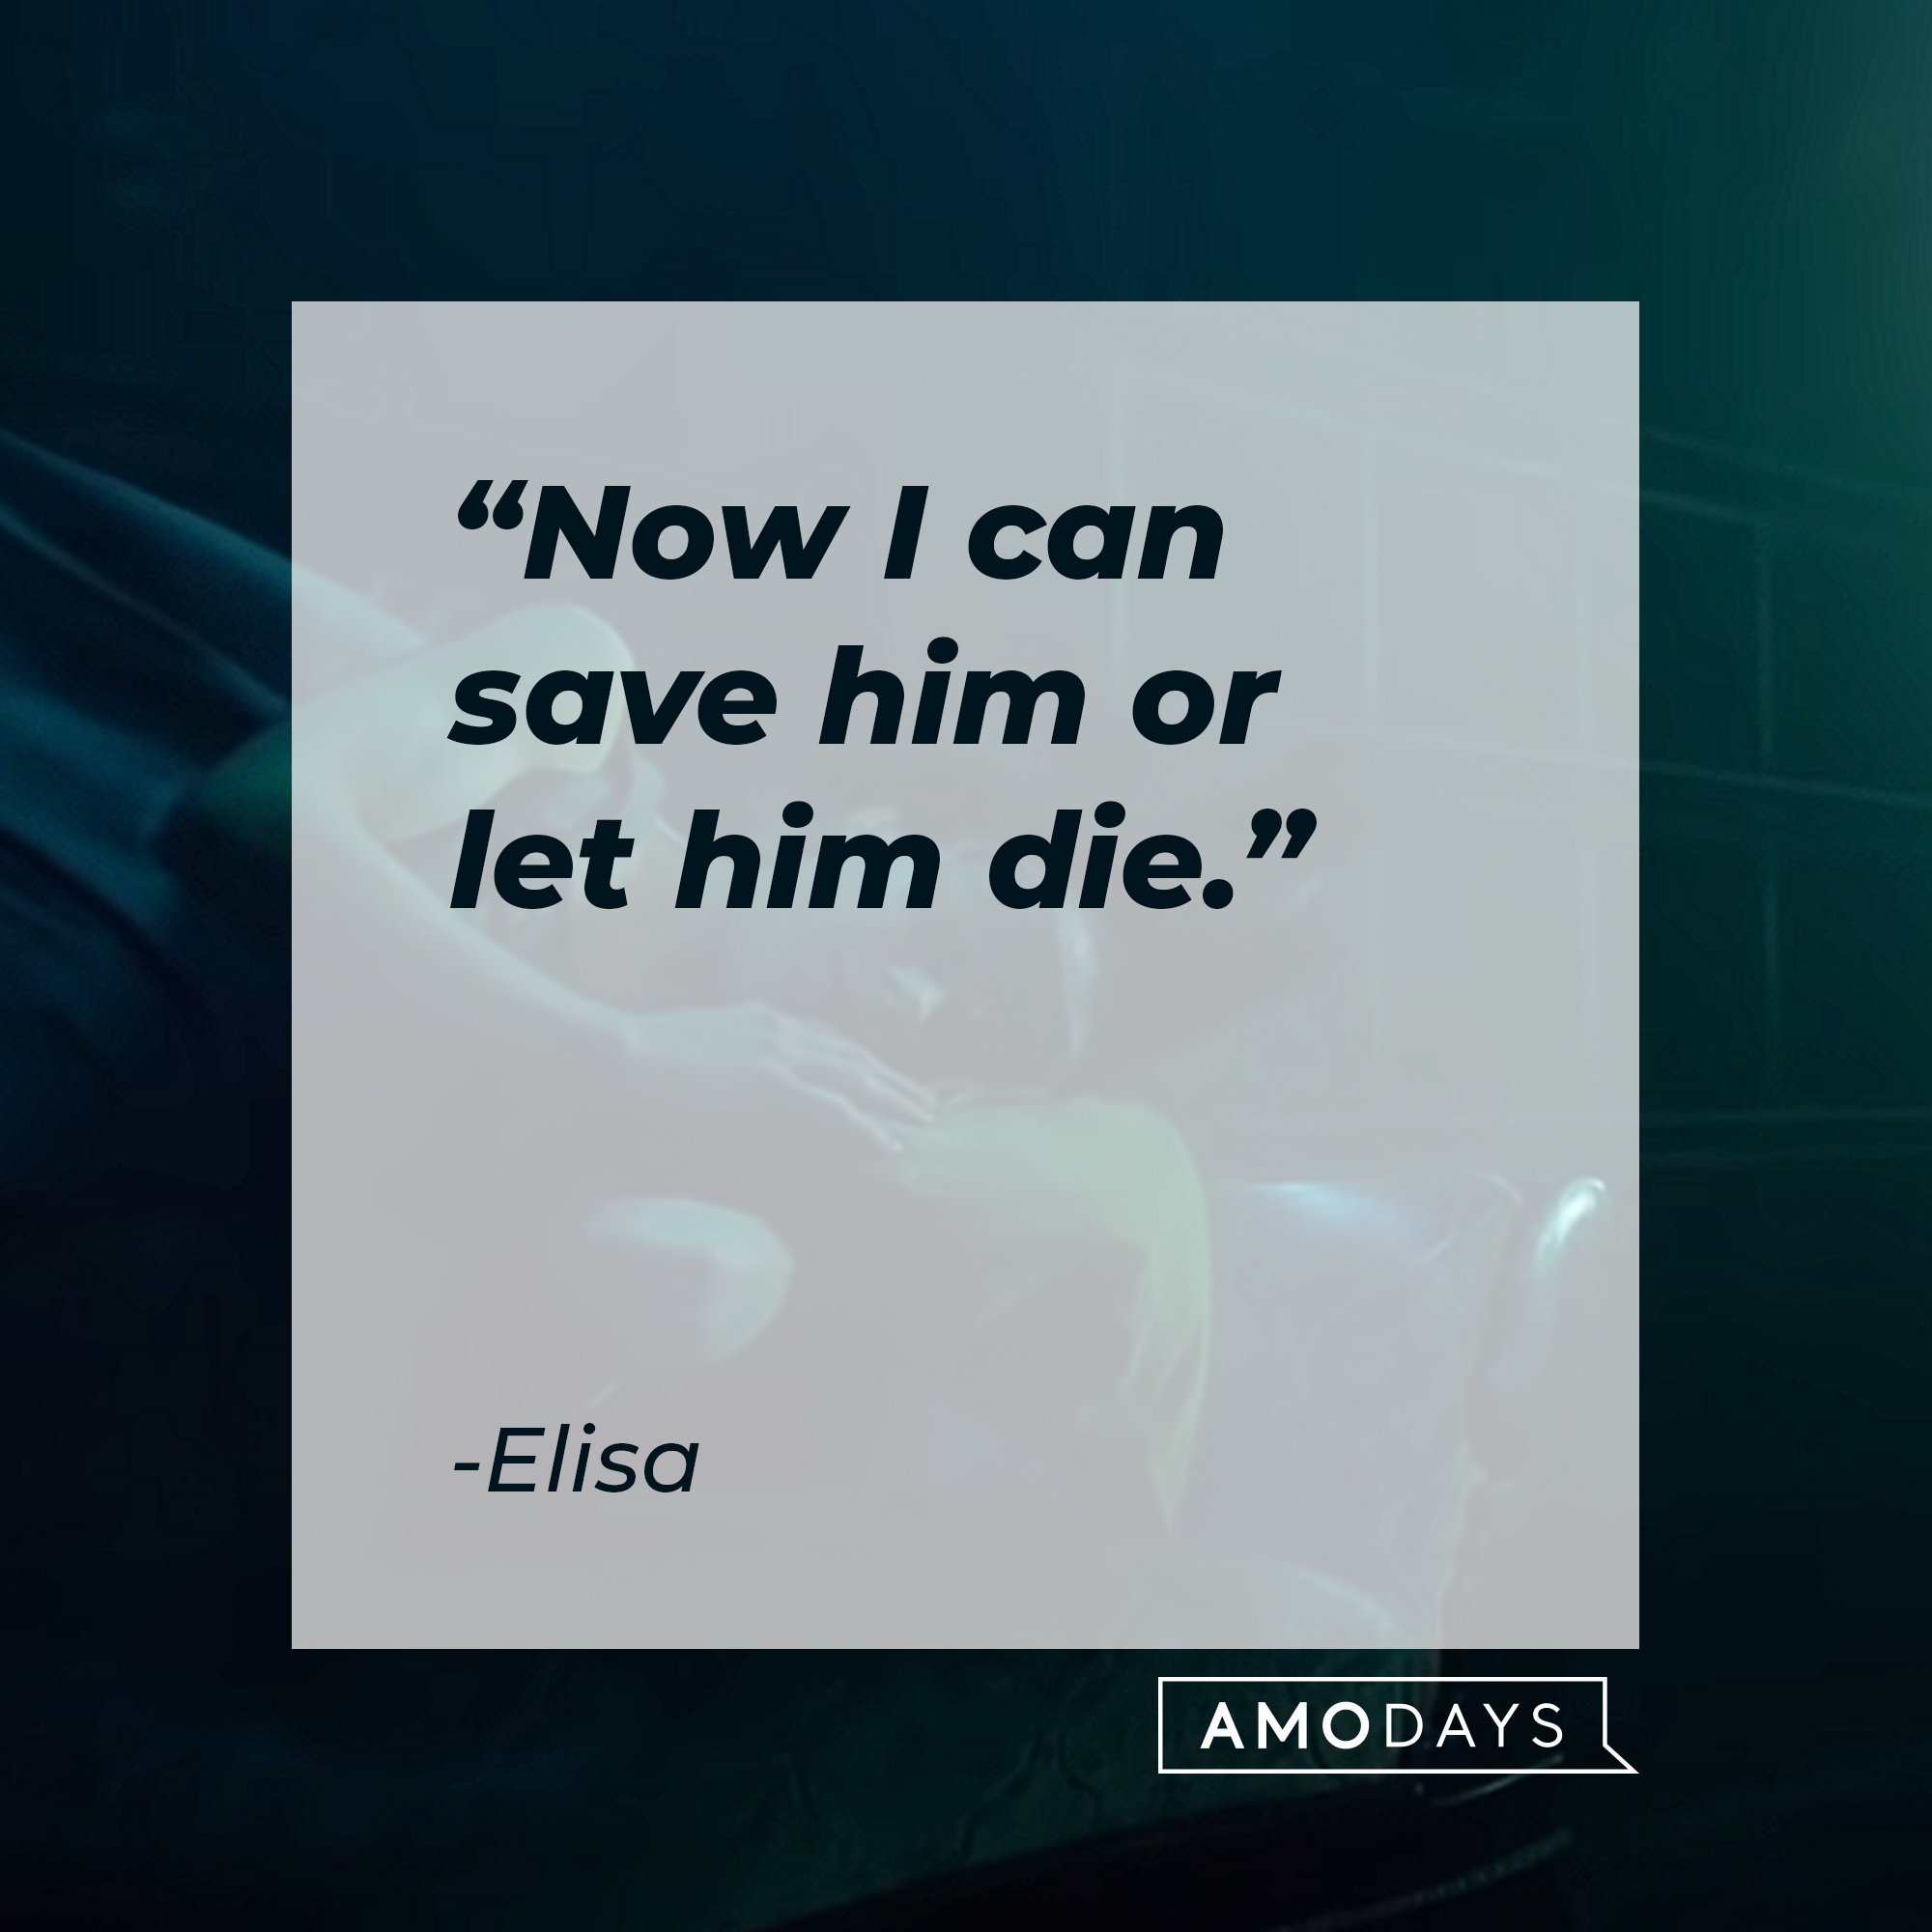 Elisa's quote : “Now I can save him or let him die.” | Source:youtube.com/searchlightpictures